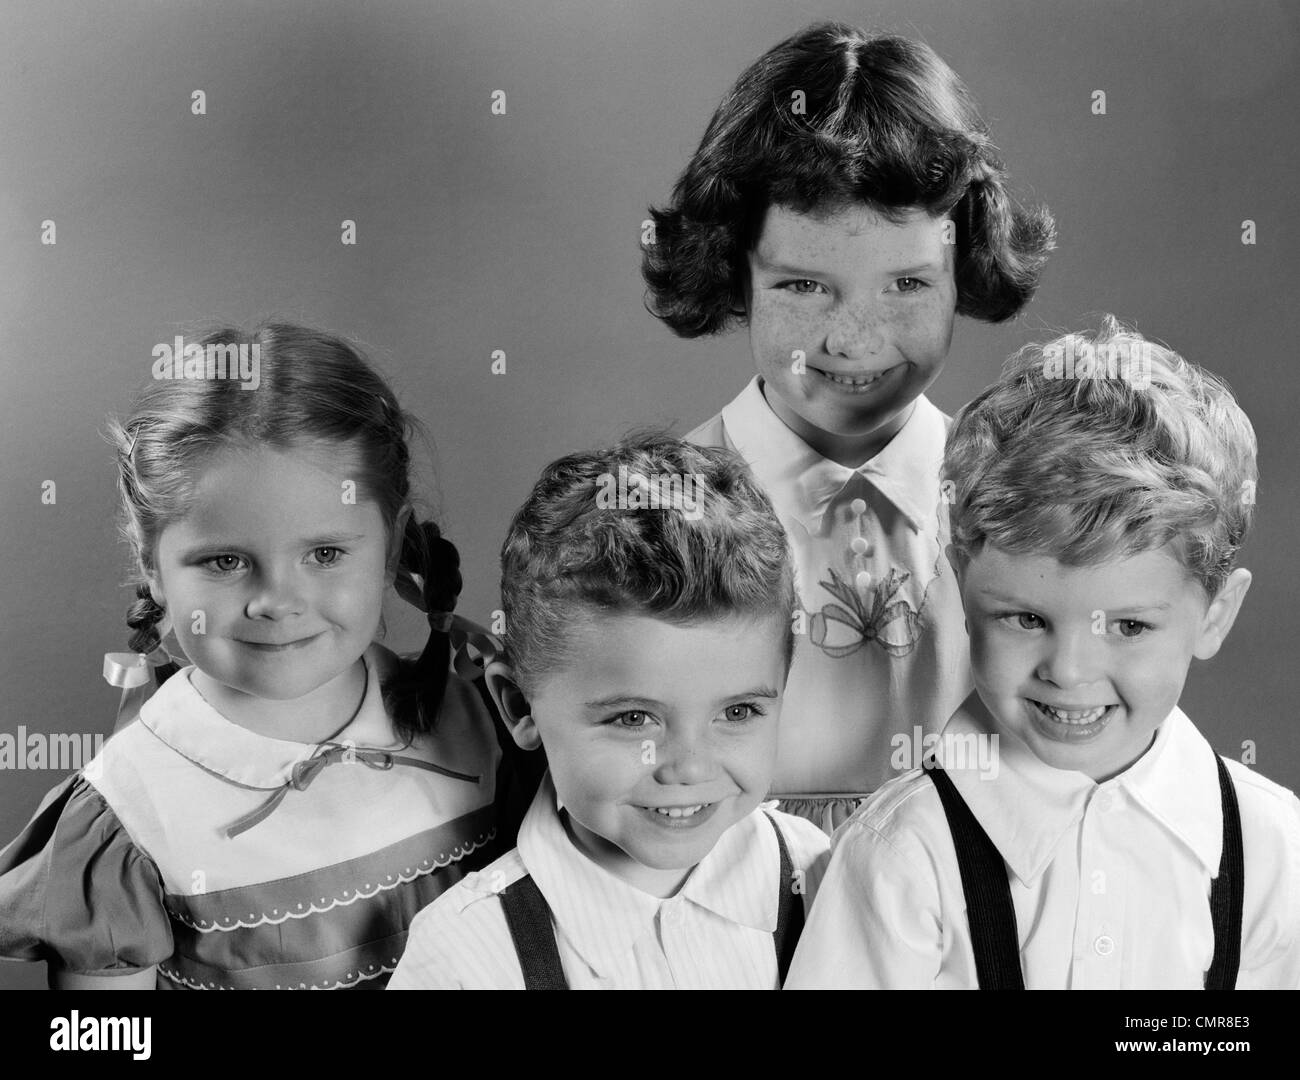 1950s PORTRAIT OF FOUR SMILING CHILDREN TWO BOYS AND TWO GIRLS Stock Photo